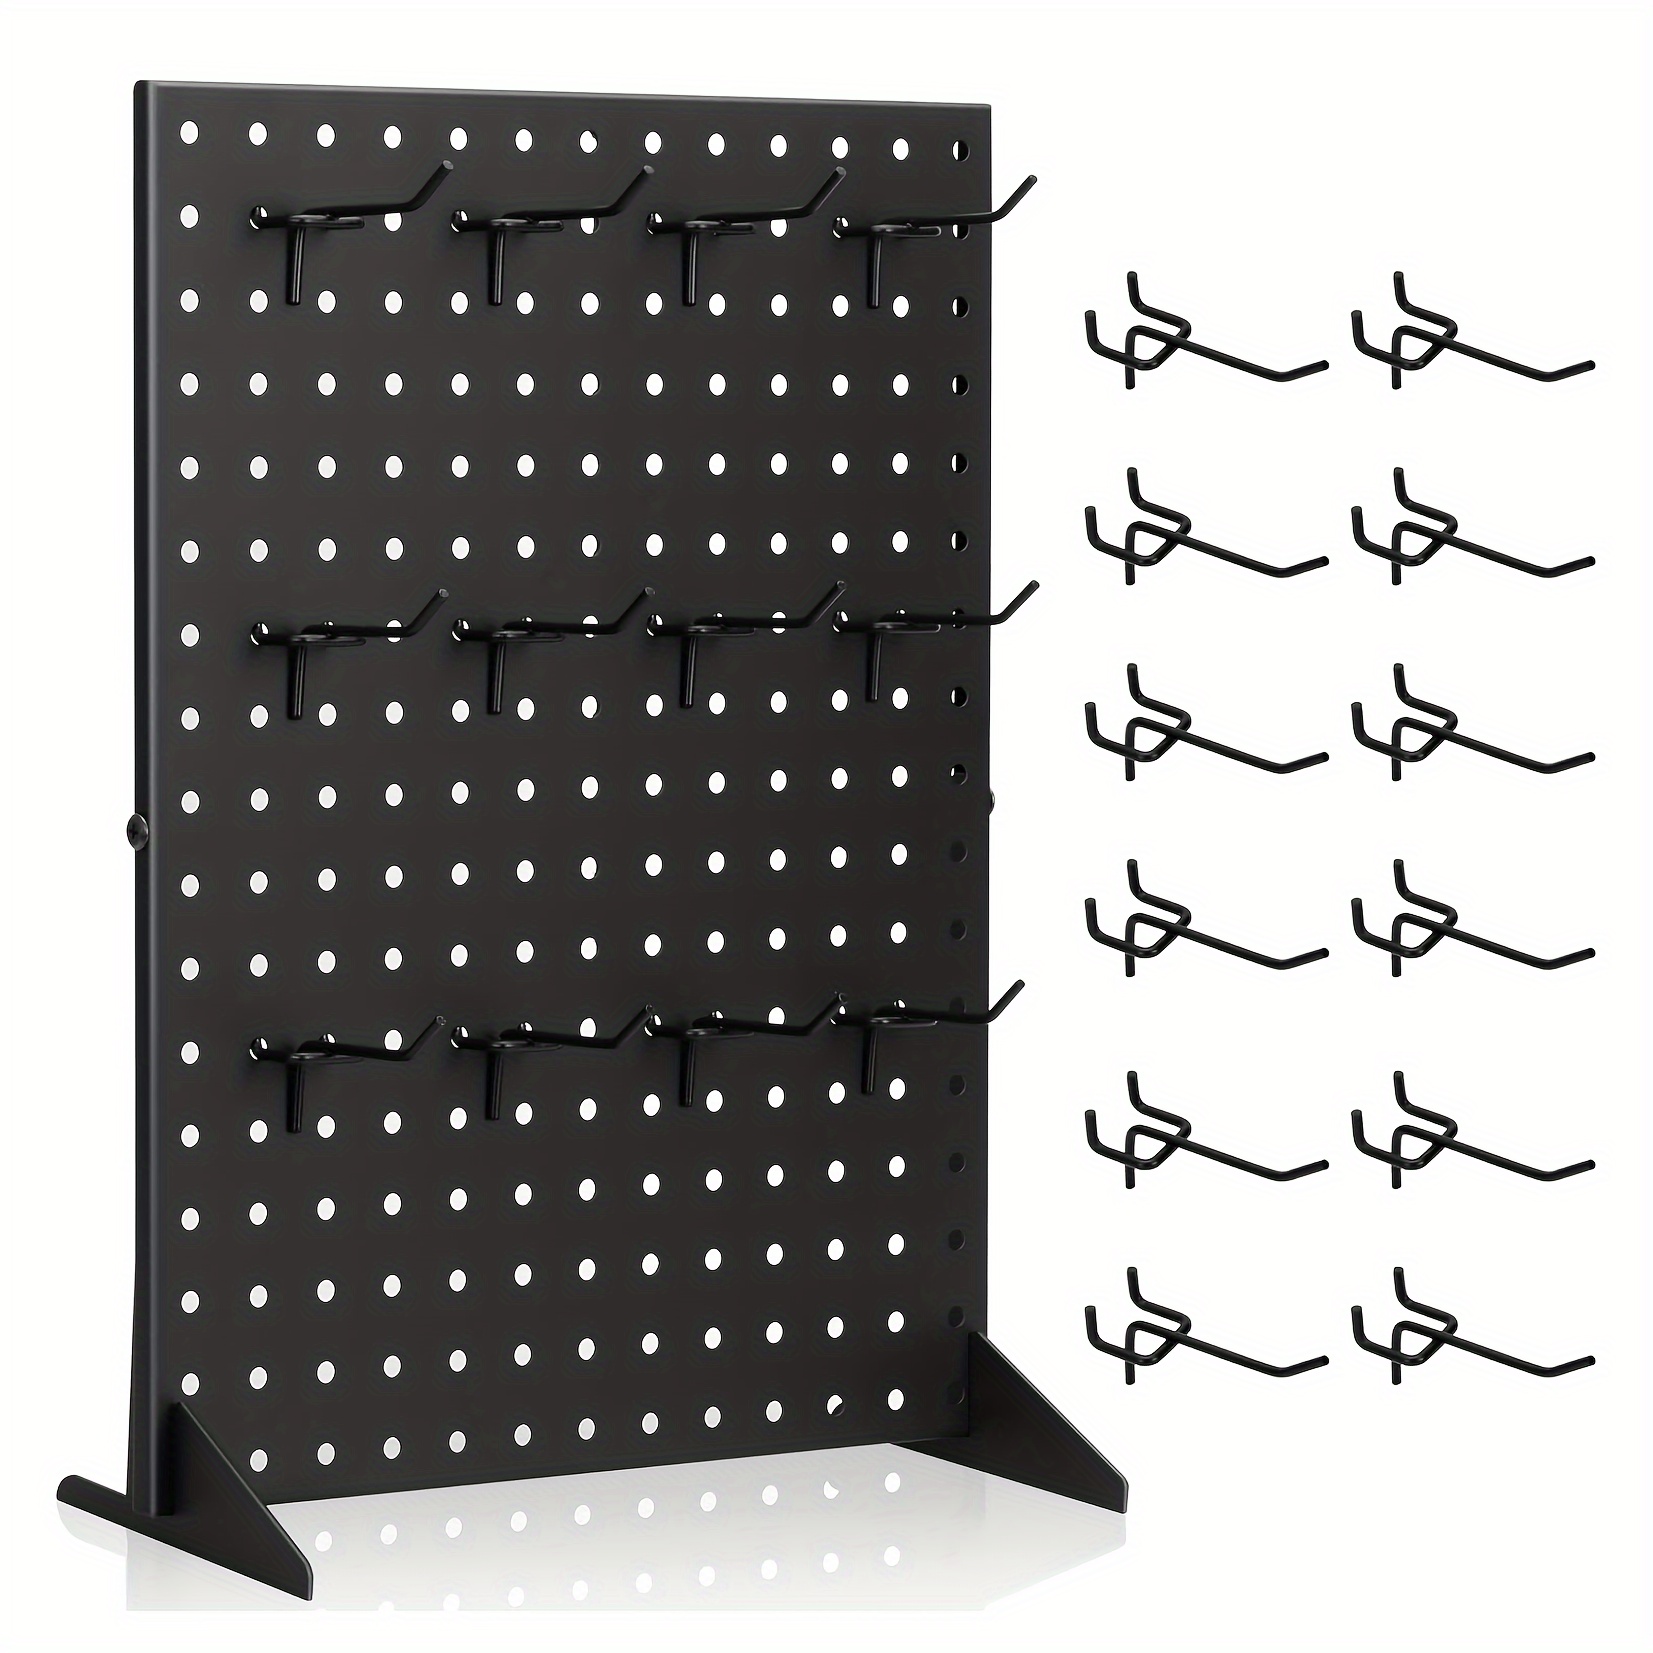 

Metal Pegboard Display Stand With 12 Peg Hooks - Durable Merchandise Rack For Accessories, Craft Shows, Retail, Boutiques - Sturdy No-power Required Product Organizer For Vendors & Events